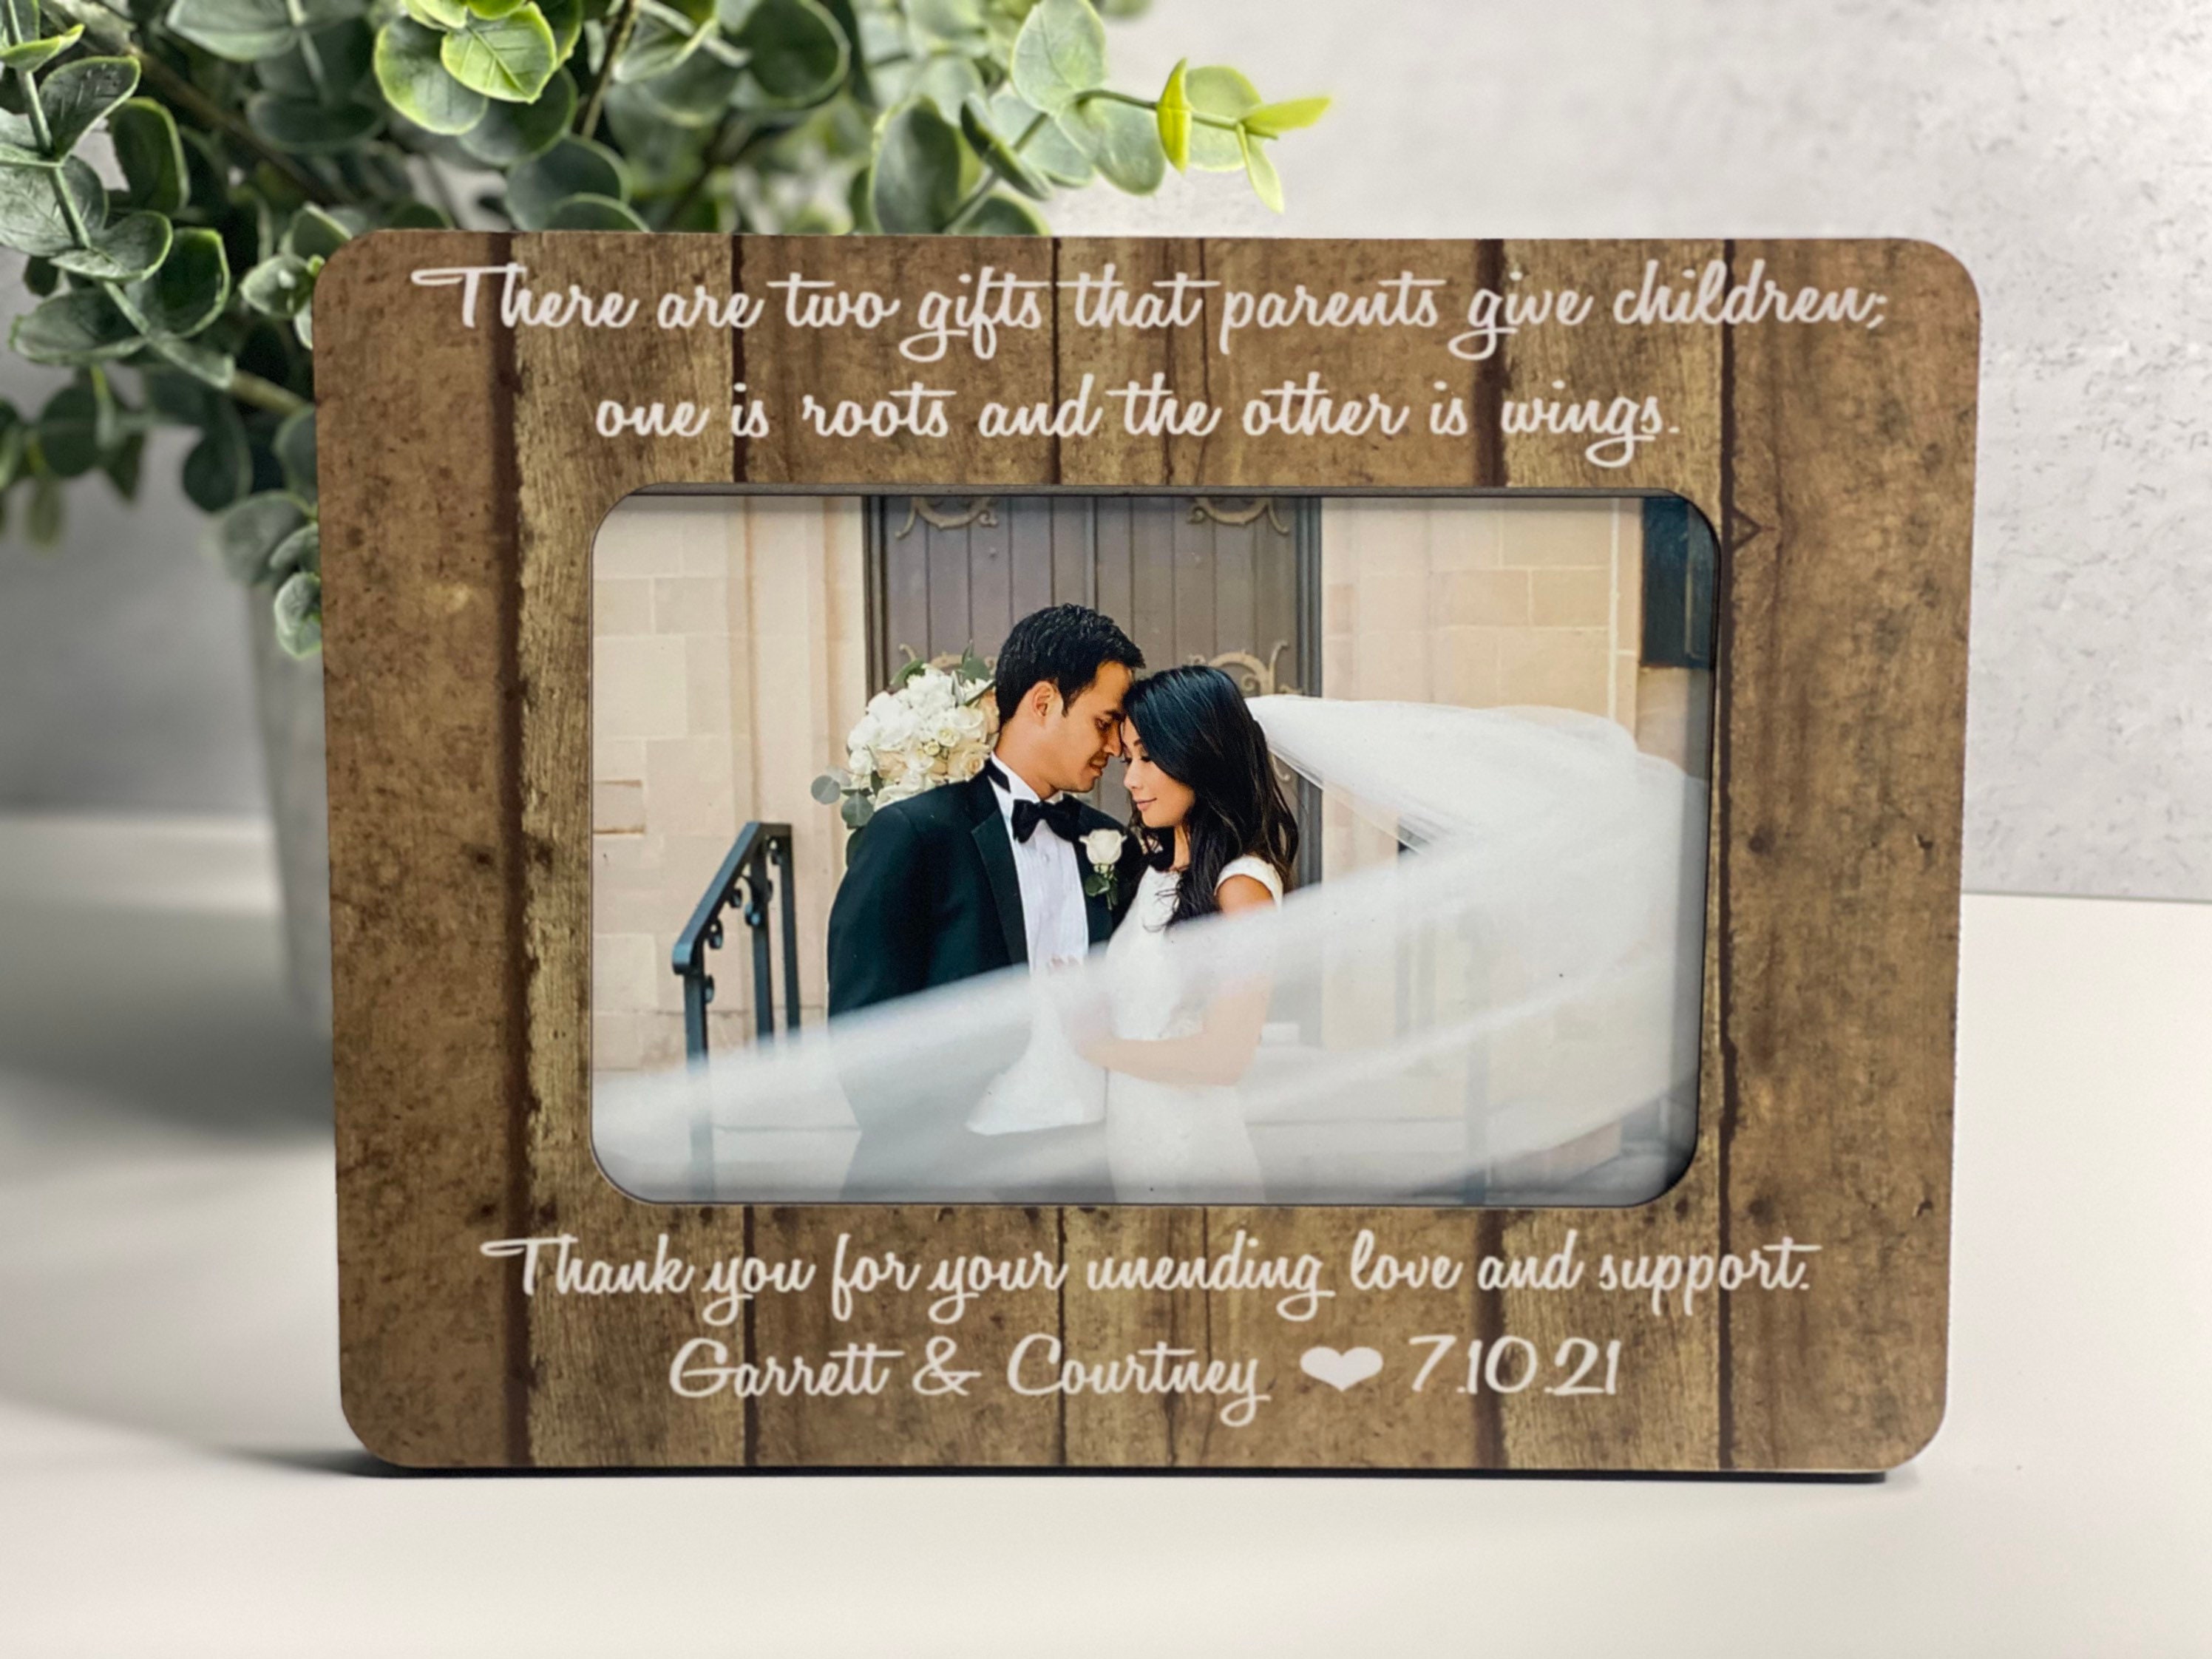 25 Best Wedding Gifts for Parents - Wedding Thank You Gifts For